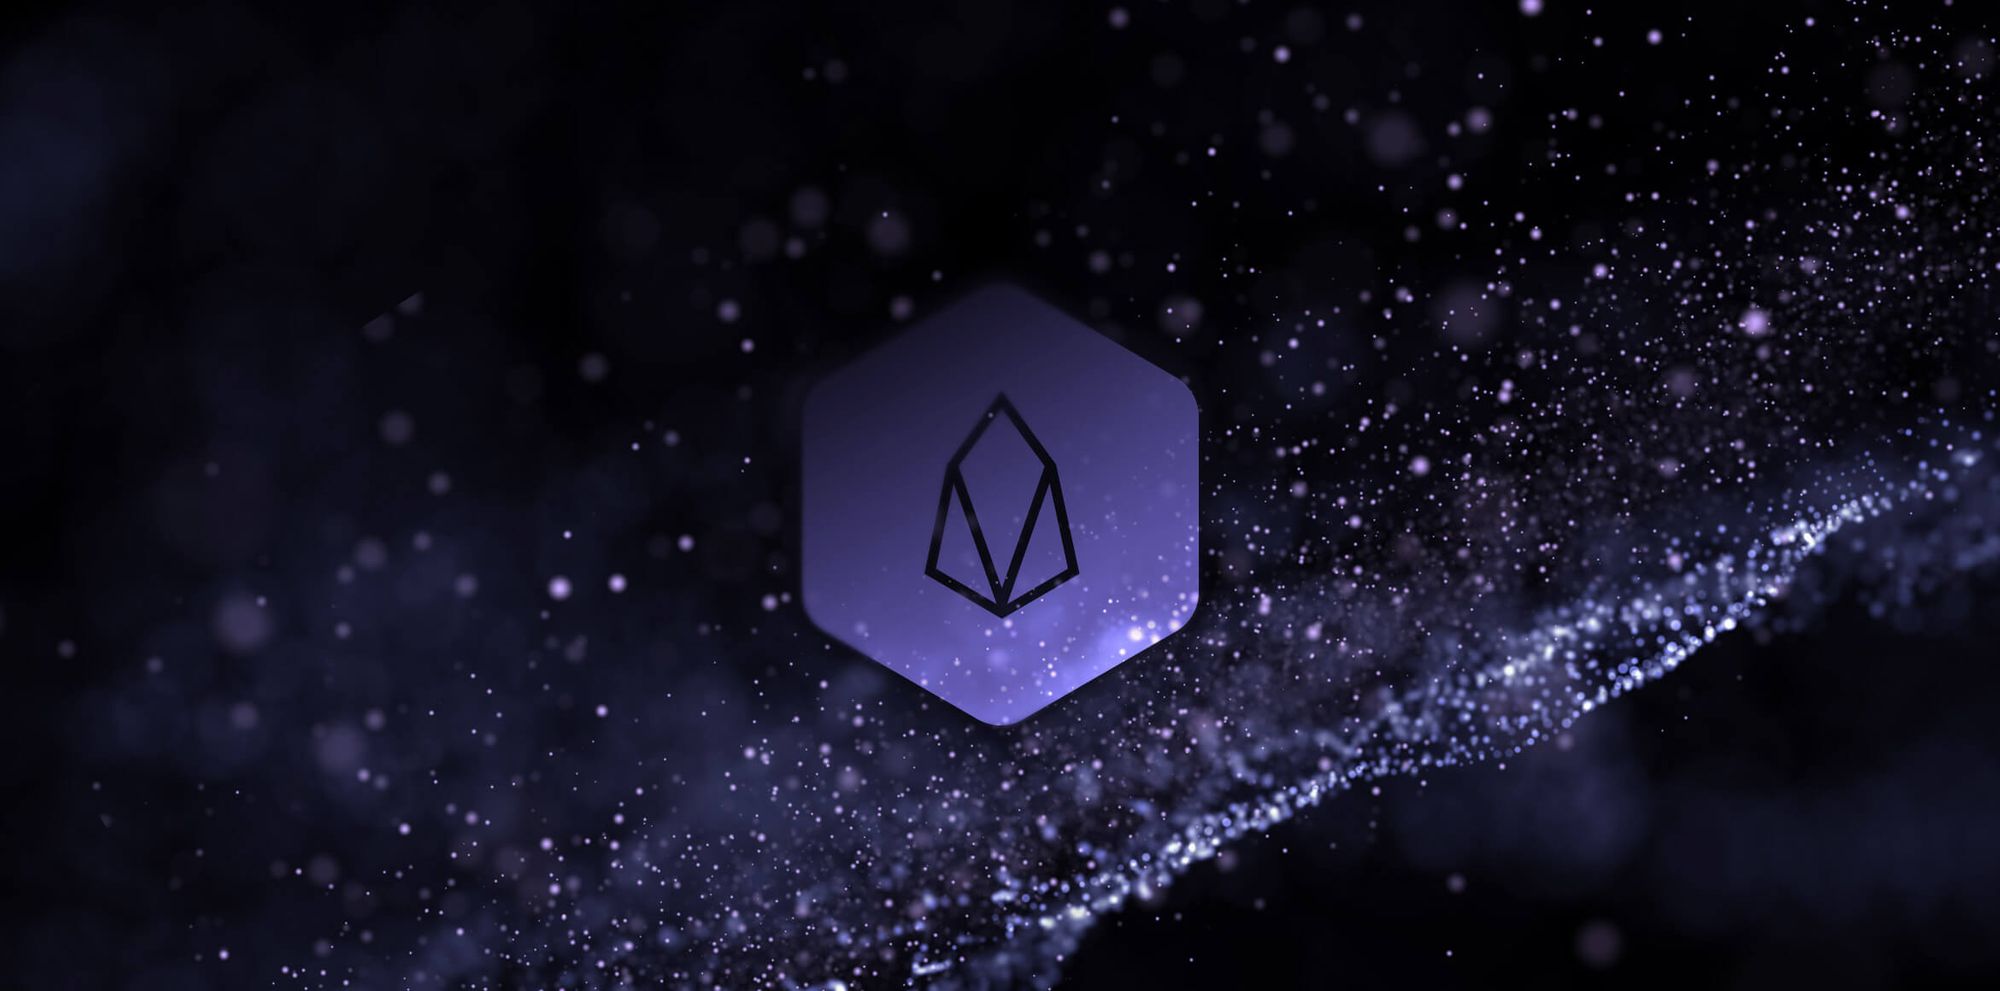 Where to Buy EOS Coin Easily in 2020